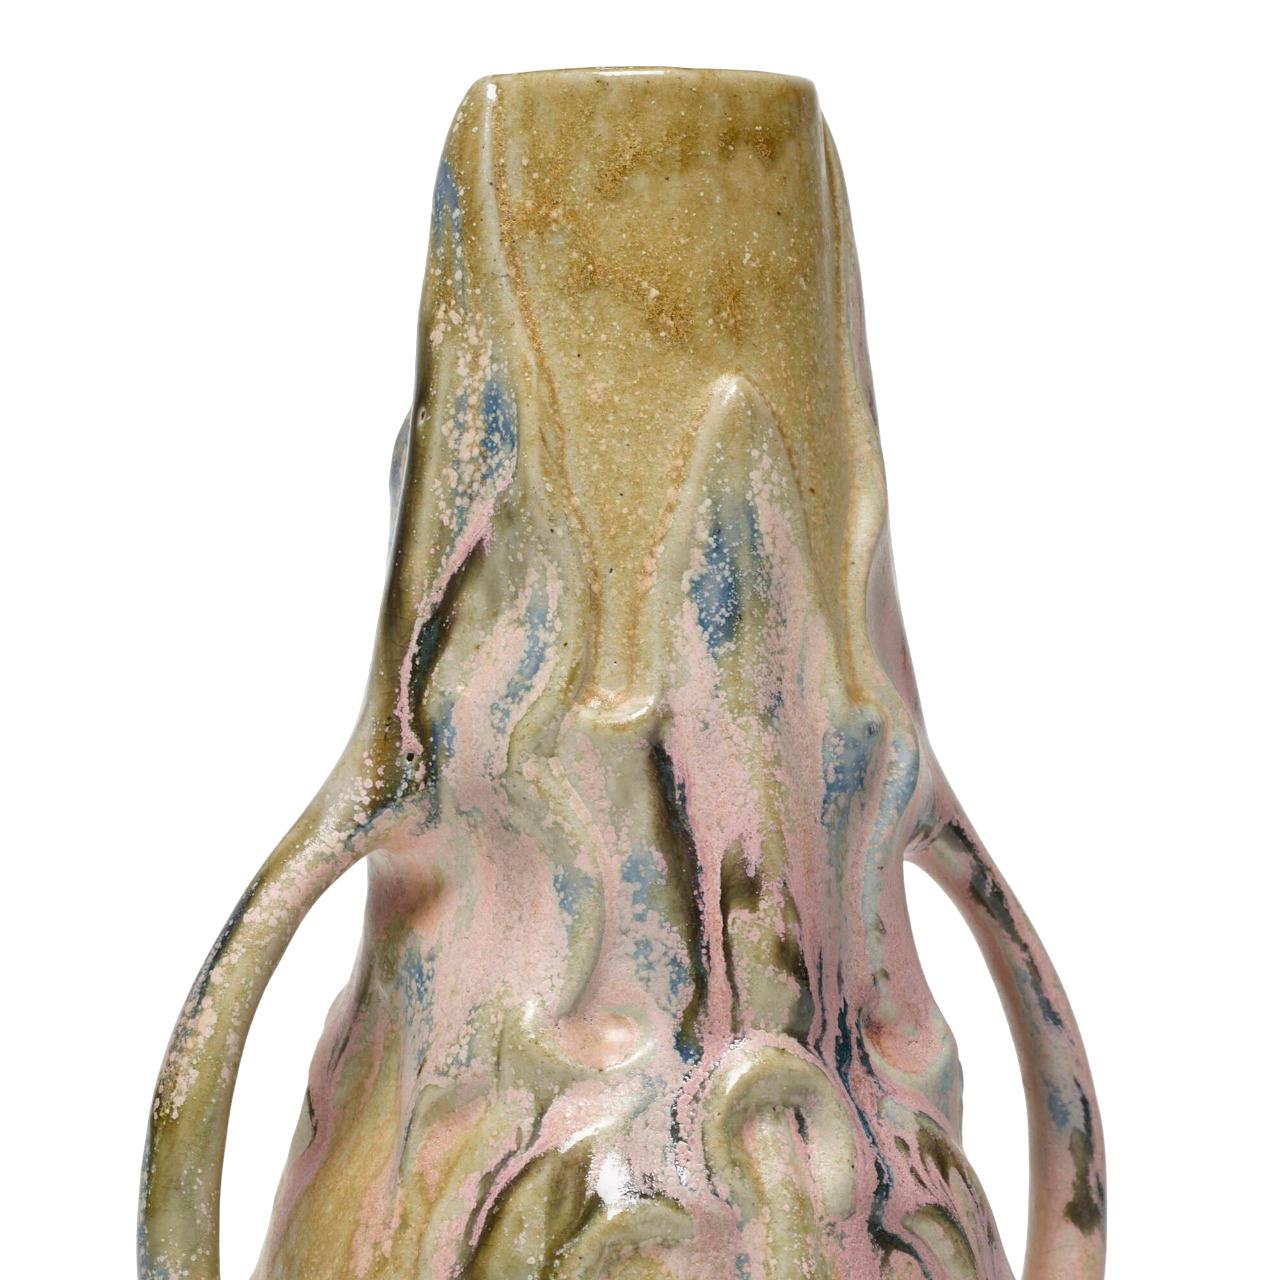 Charles Gréber (1853-1935) was a renowned ceramicist who left a lasting impact on Beauvaisian ceramics by expanding his family business, established by his father in 1870.
This elegant two-handled vase is the perfect addition to any home décor. Its